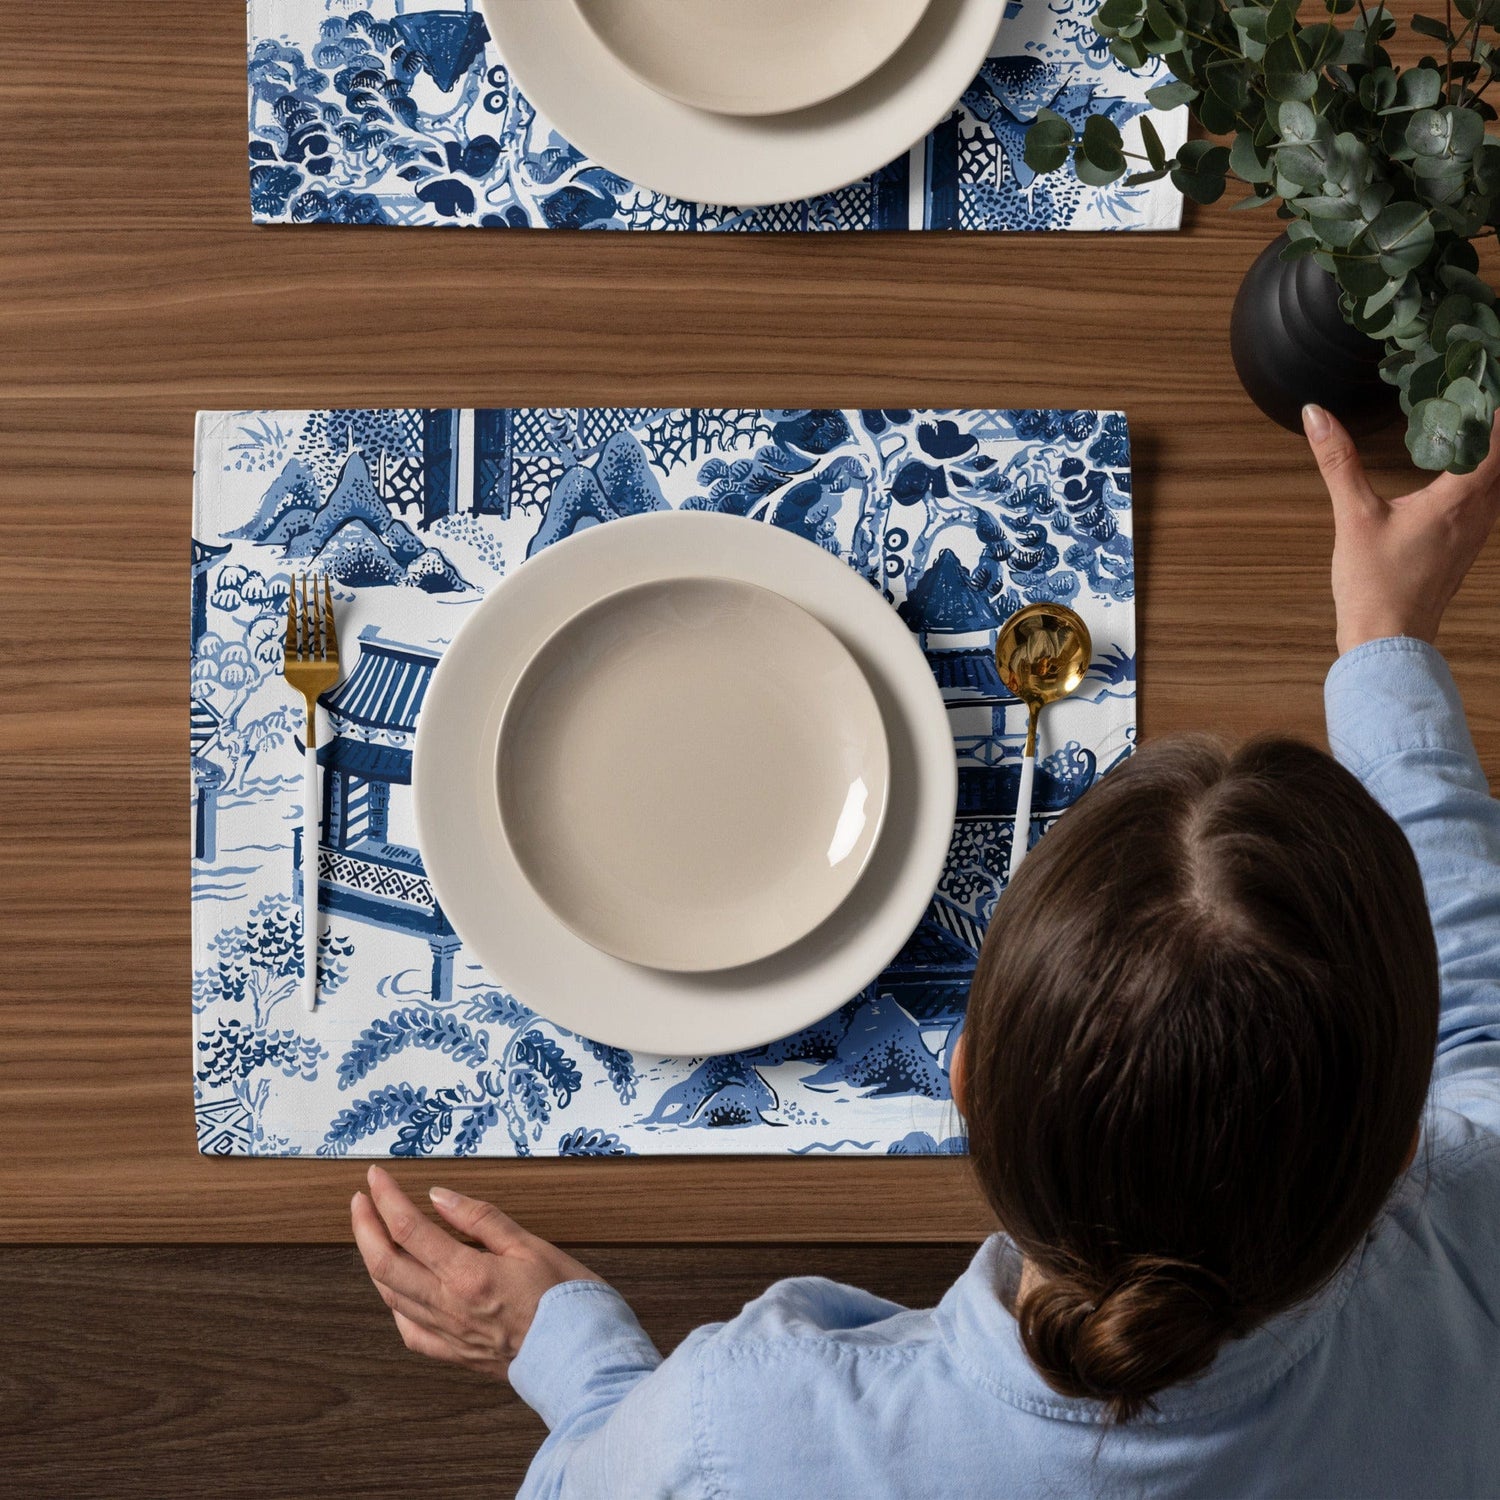 Kate McEnroe New York Chinoiserie Blue and White Placemats Set of 4, Traditional Asian Pagodas and Cherry Blossoms Porcelain Design Table Mats Placemats 8697237_17484